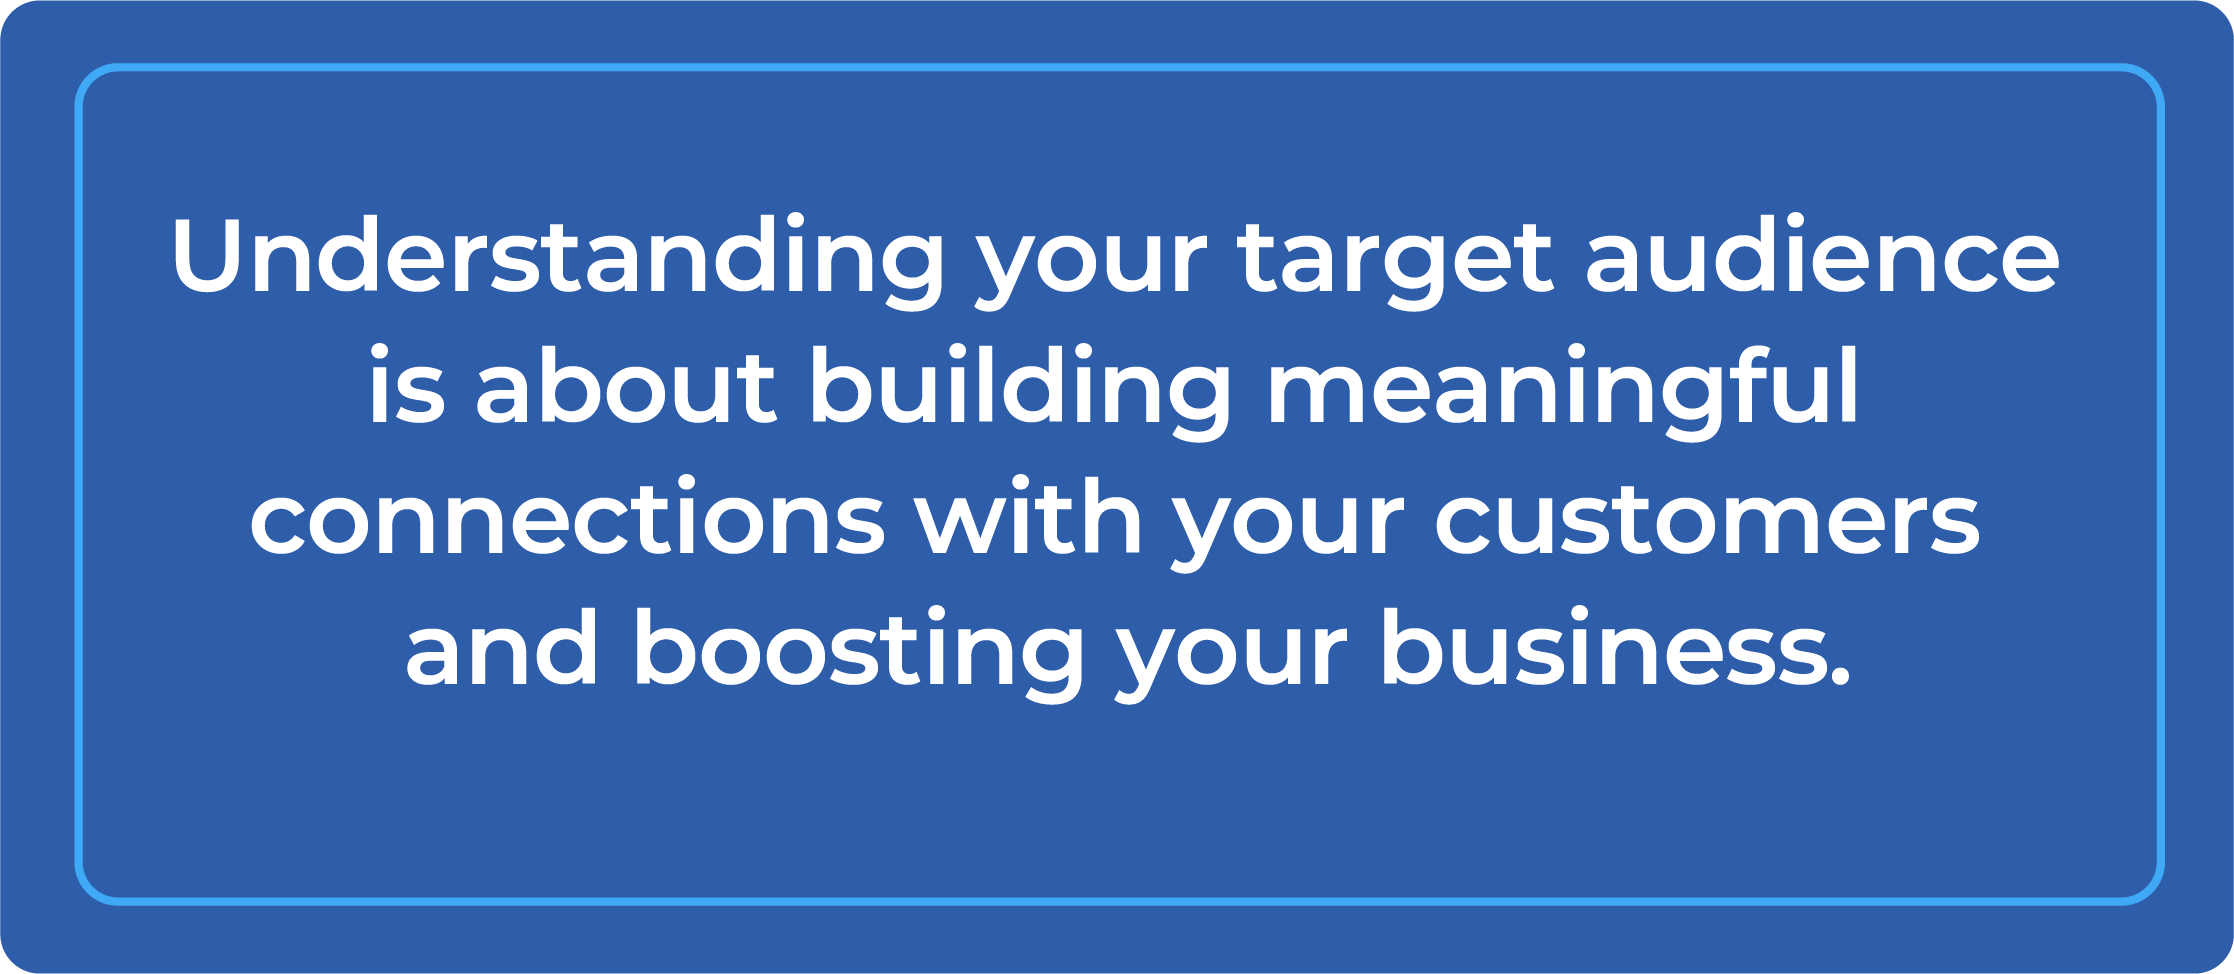 Understanding your target audience is about building meaningful connections with your customers and boosting your business.